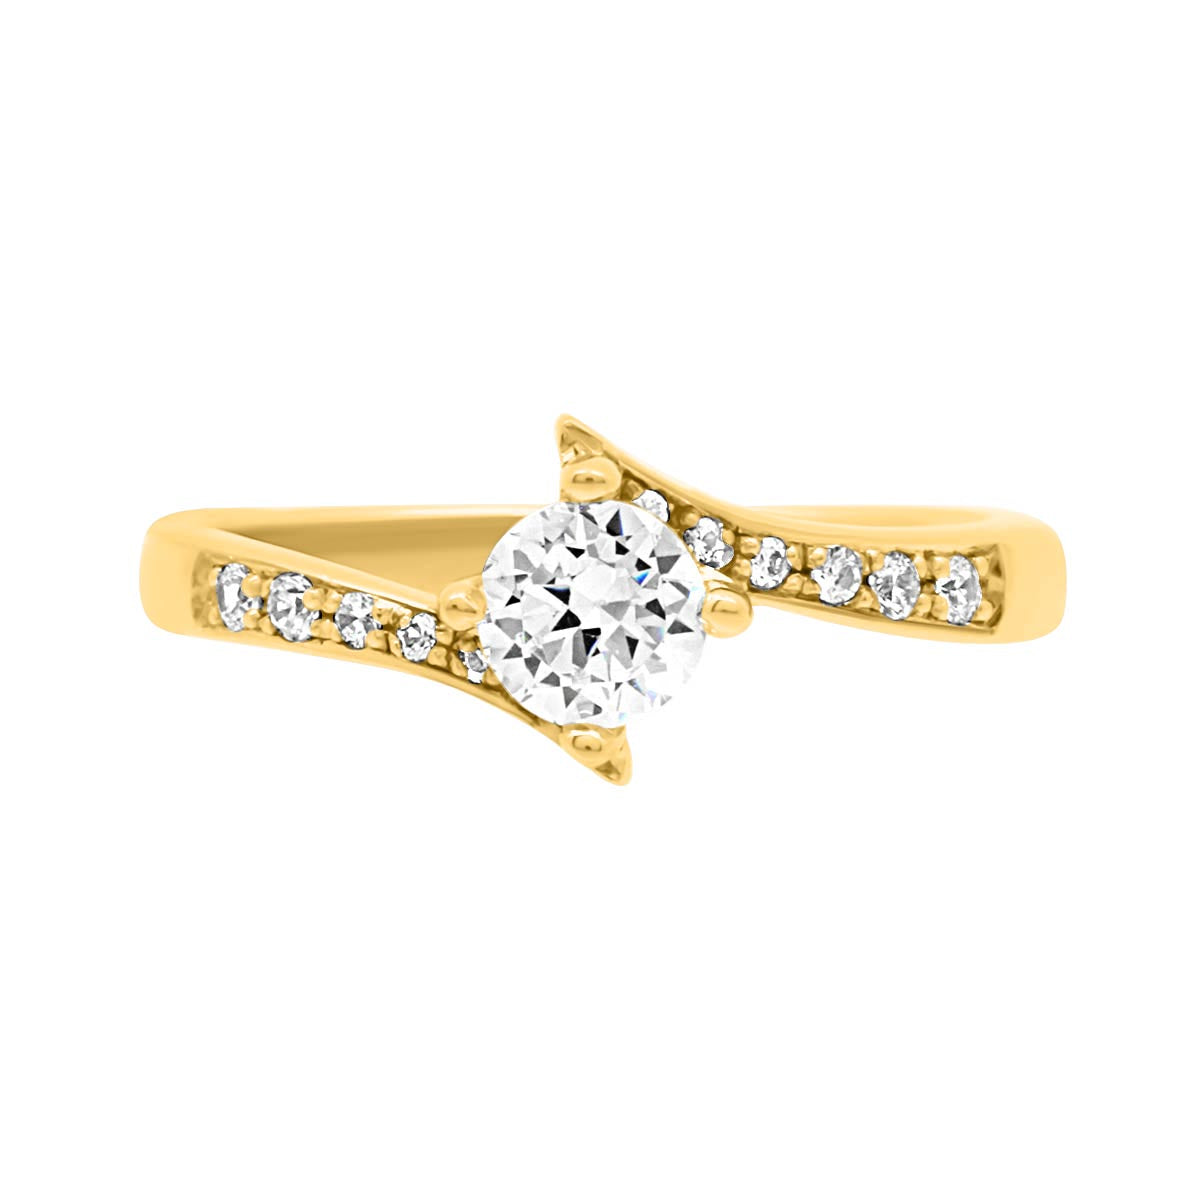 Quirky Diamond Engagement Ring in yellow gold laying flat